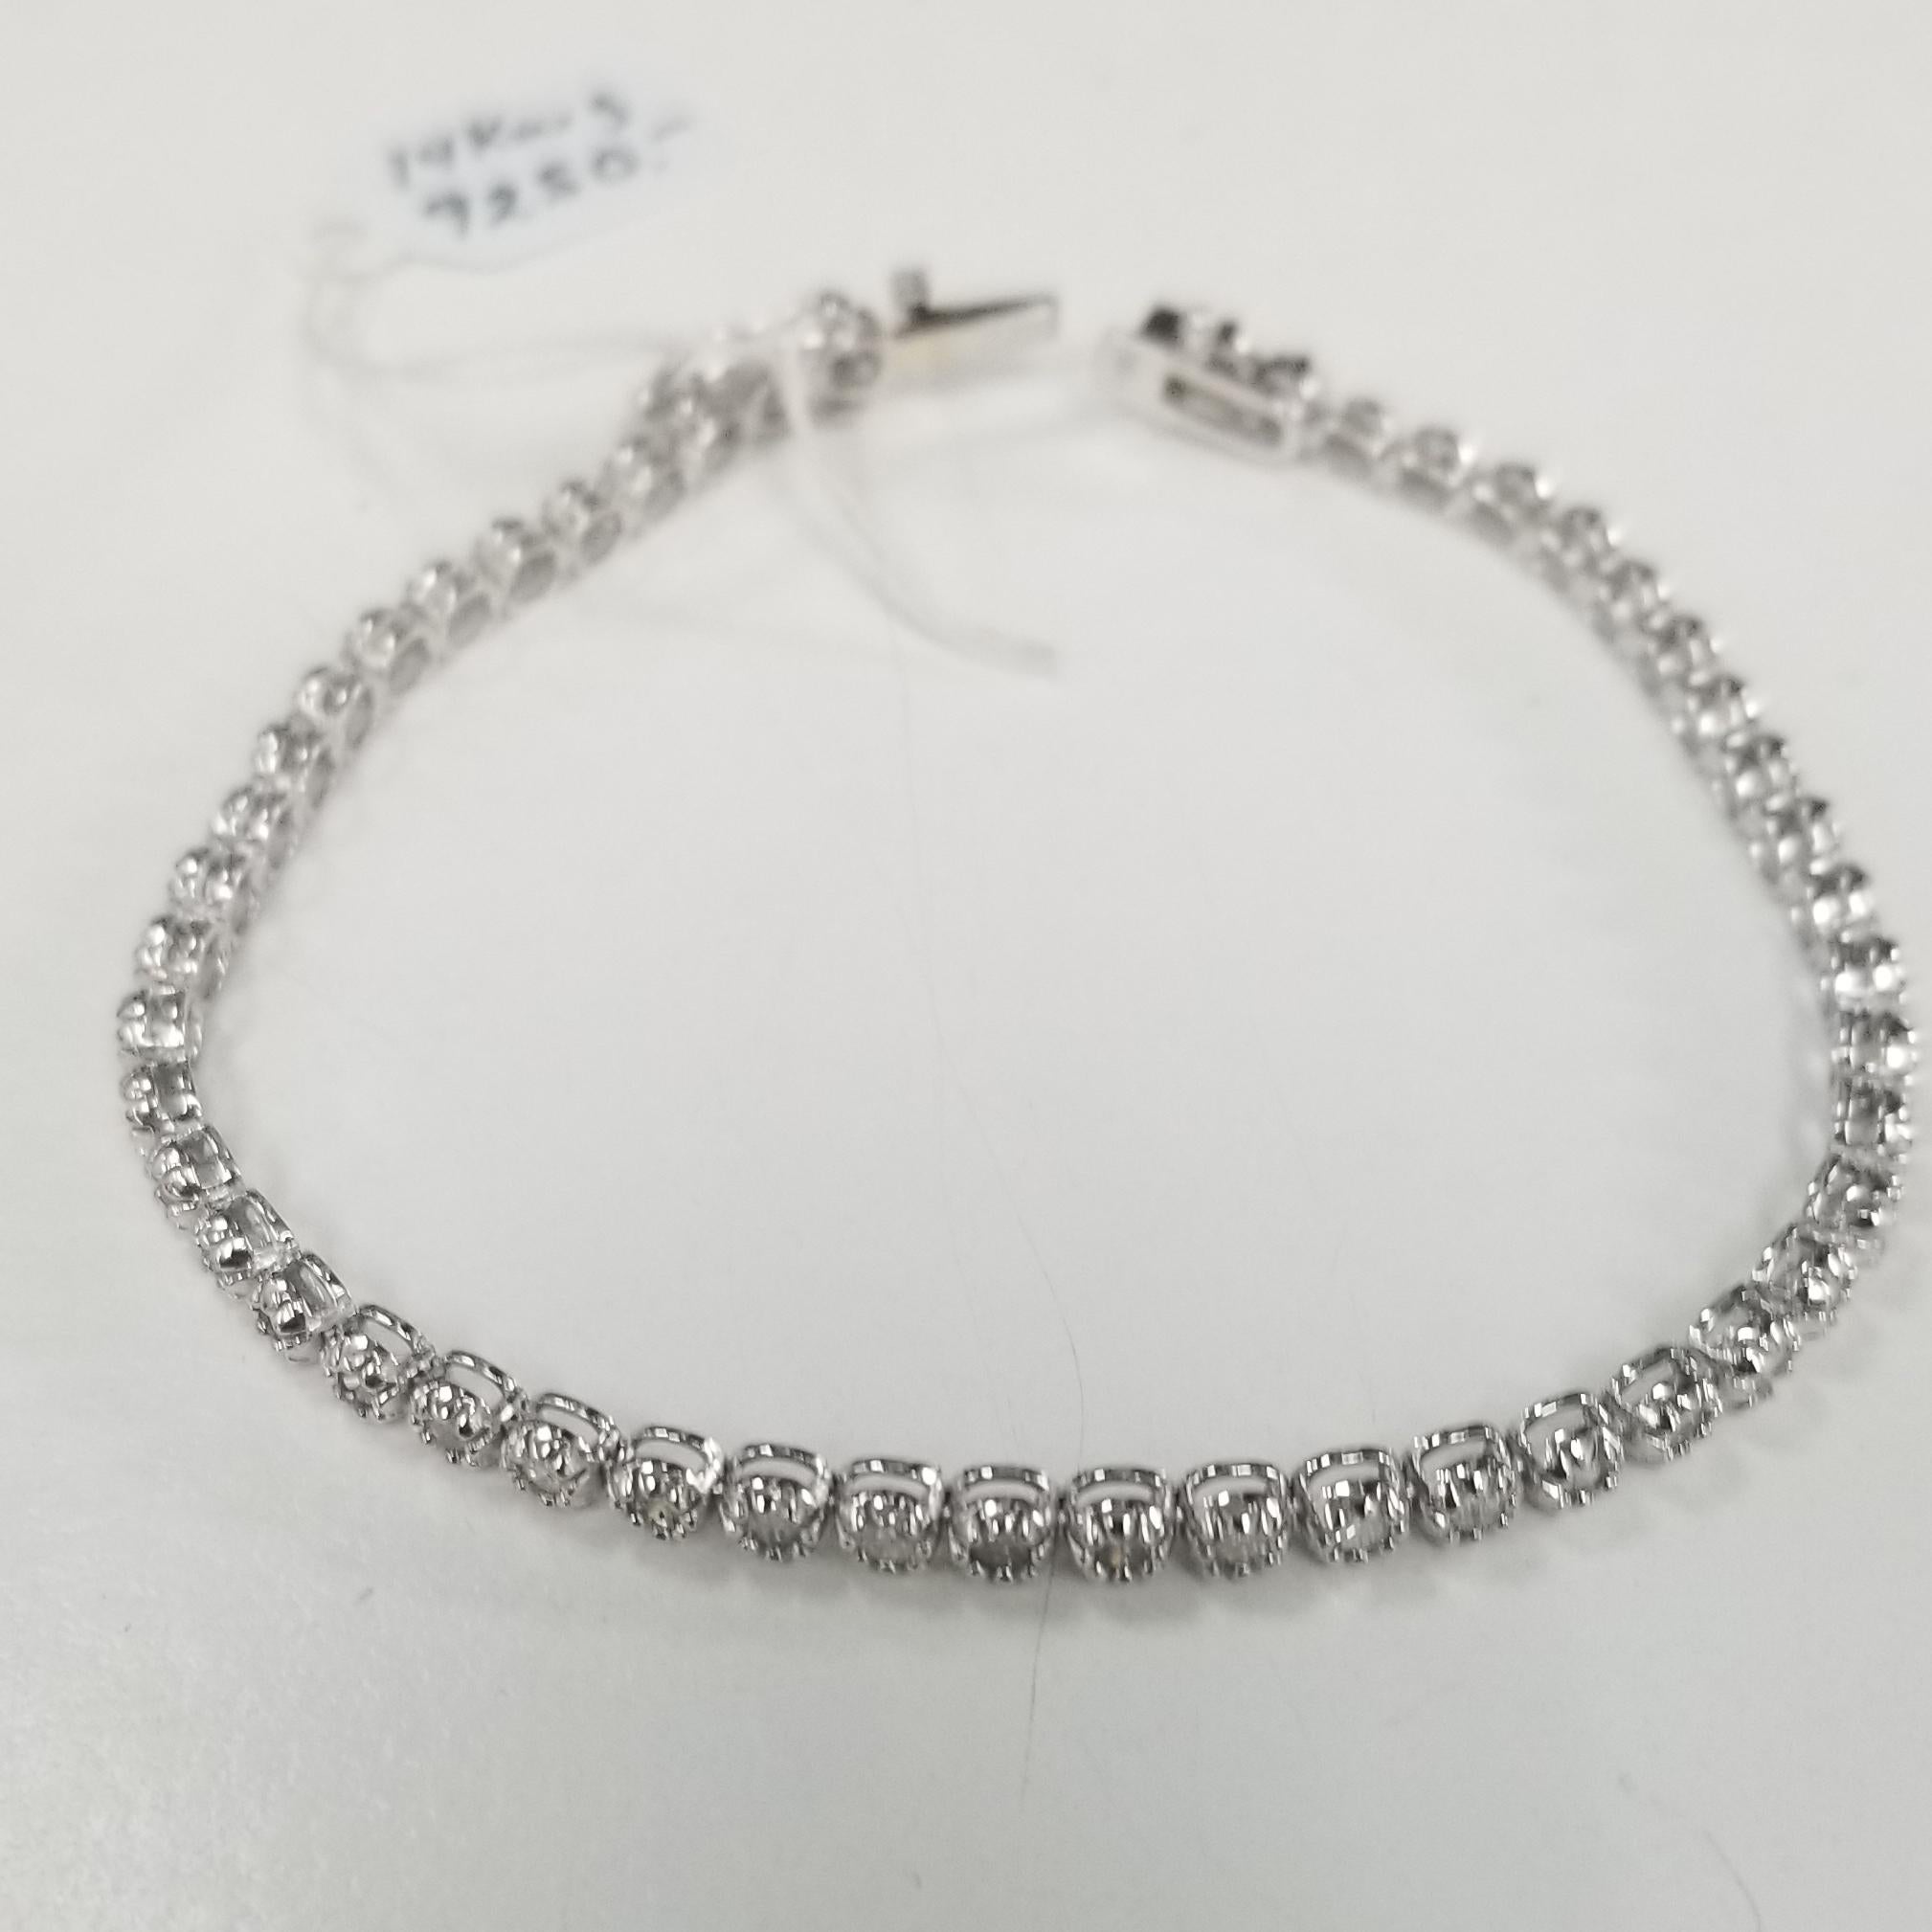 Specifications:
    main stone:ROUND DIAMONDS
    diamonds: 49 PCS
    carat total weight:approximately 3.02 CTW
    color: H-I
    clarity: SI1-SI3
    brand:CUSTOM MADE
    metal:14K white gold
    type:BRACELET
    weight:7.5 gr
    length:7.25